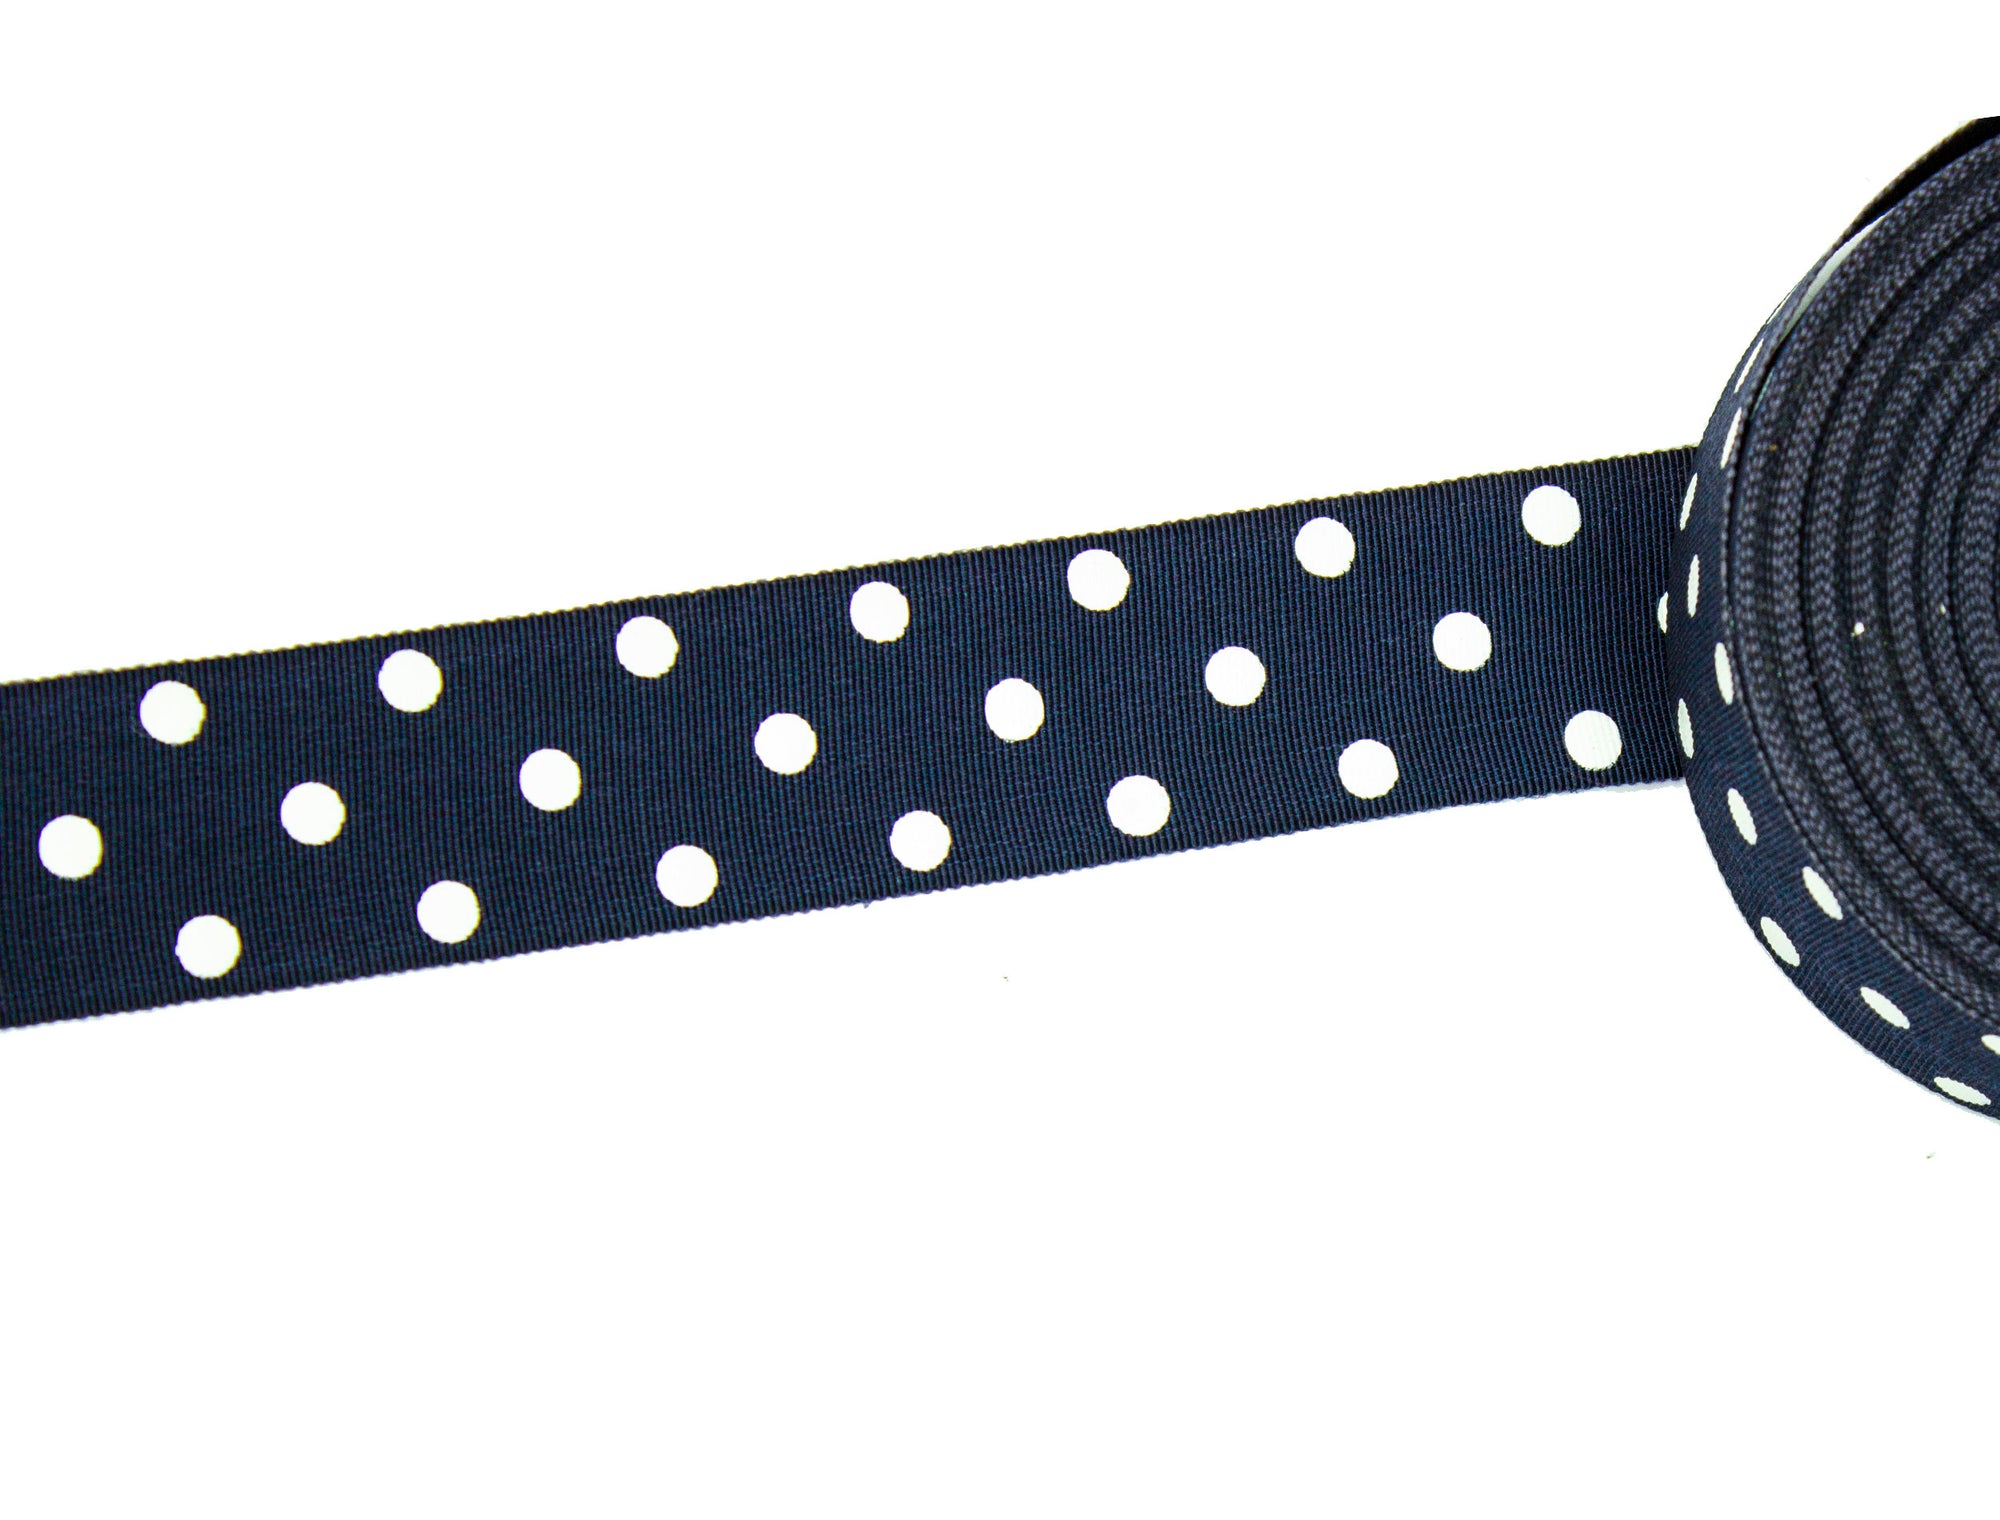 Vintage Petersham Ribbon Navy Blue with White Printed Dots Measures 35 mm Wide - Sold by the Yard